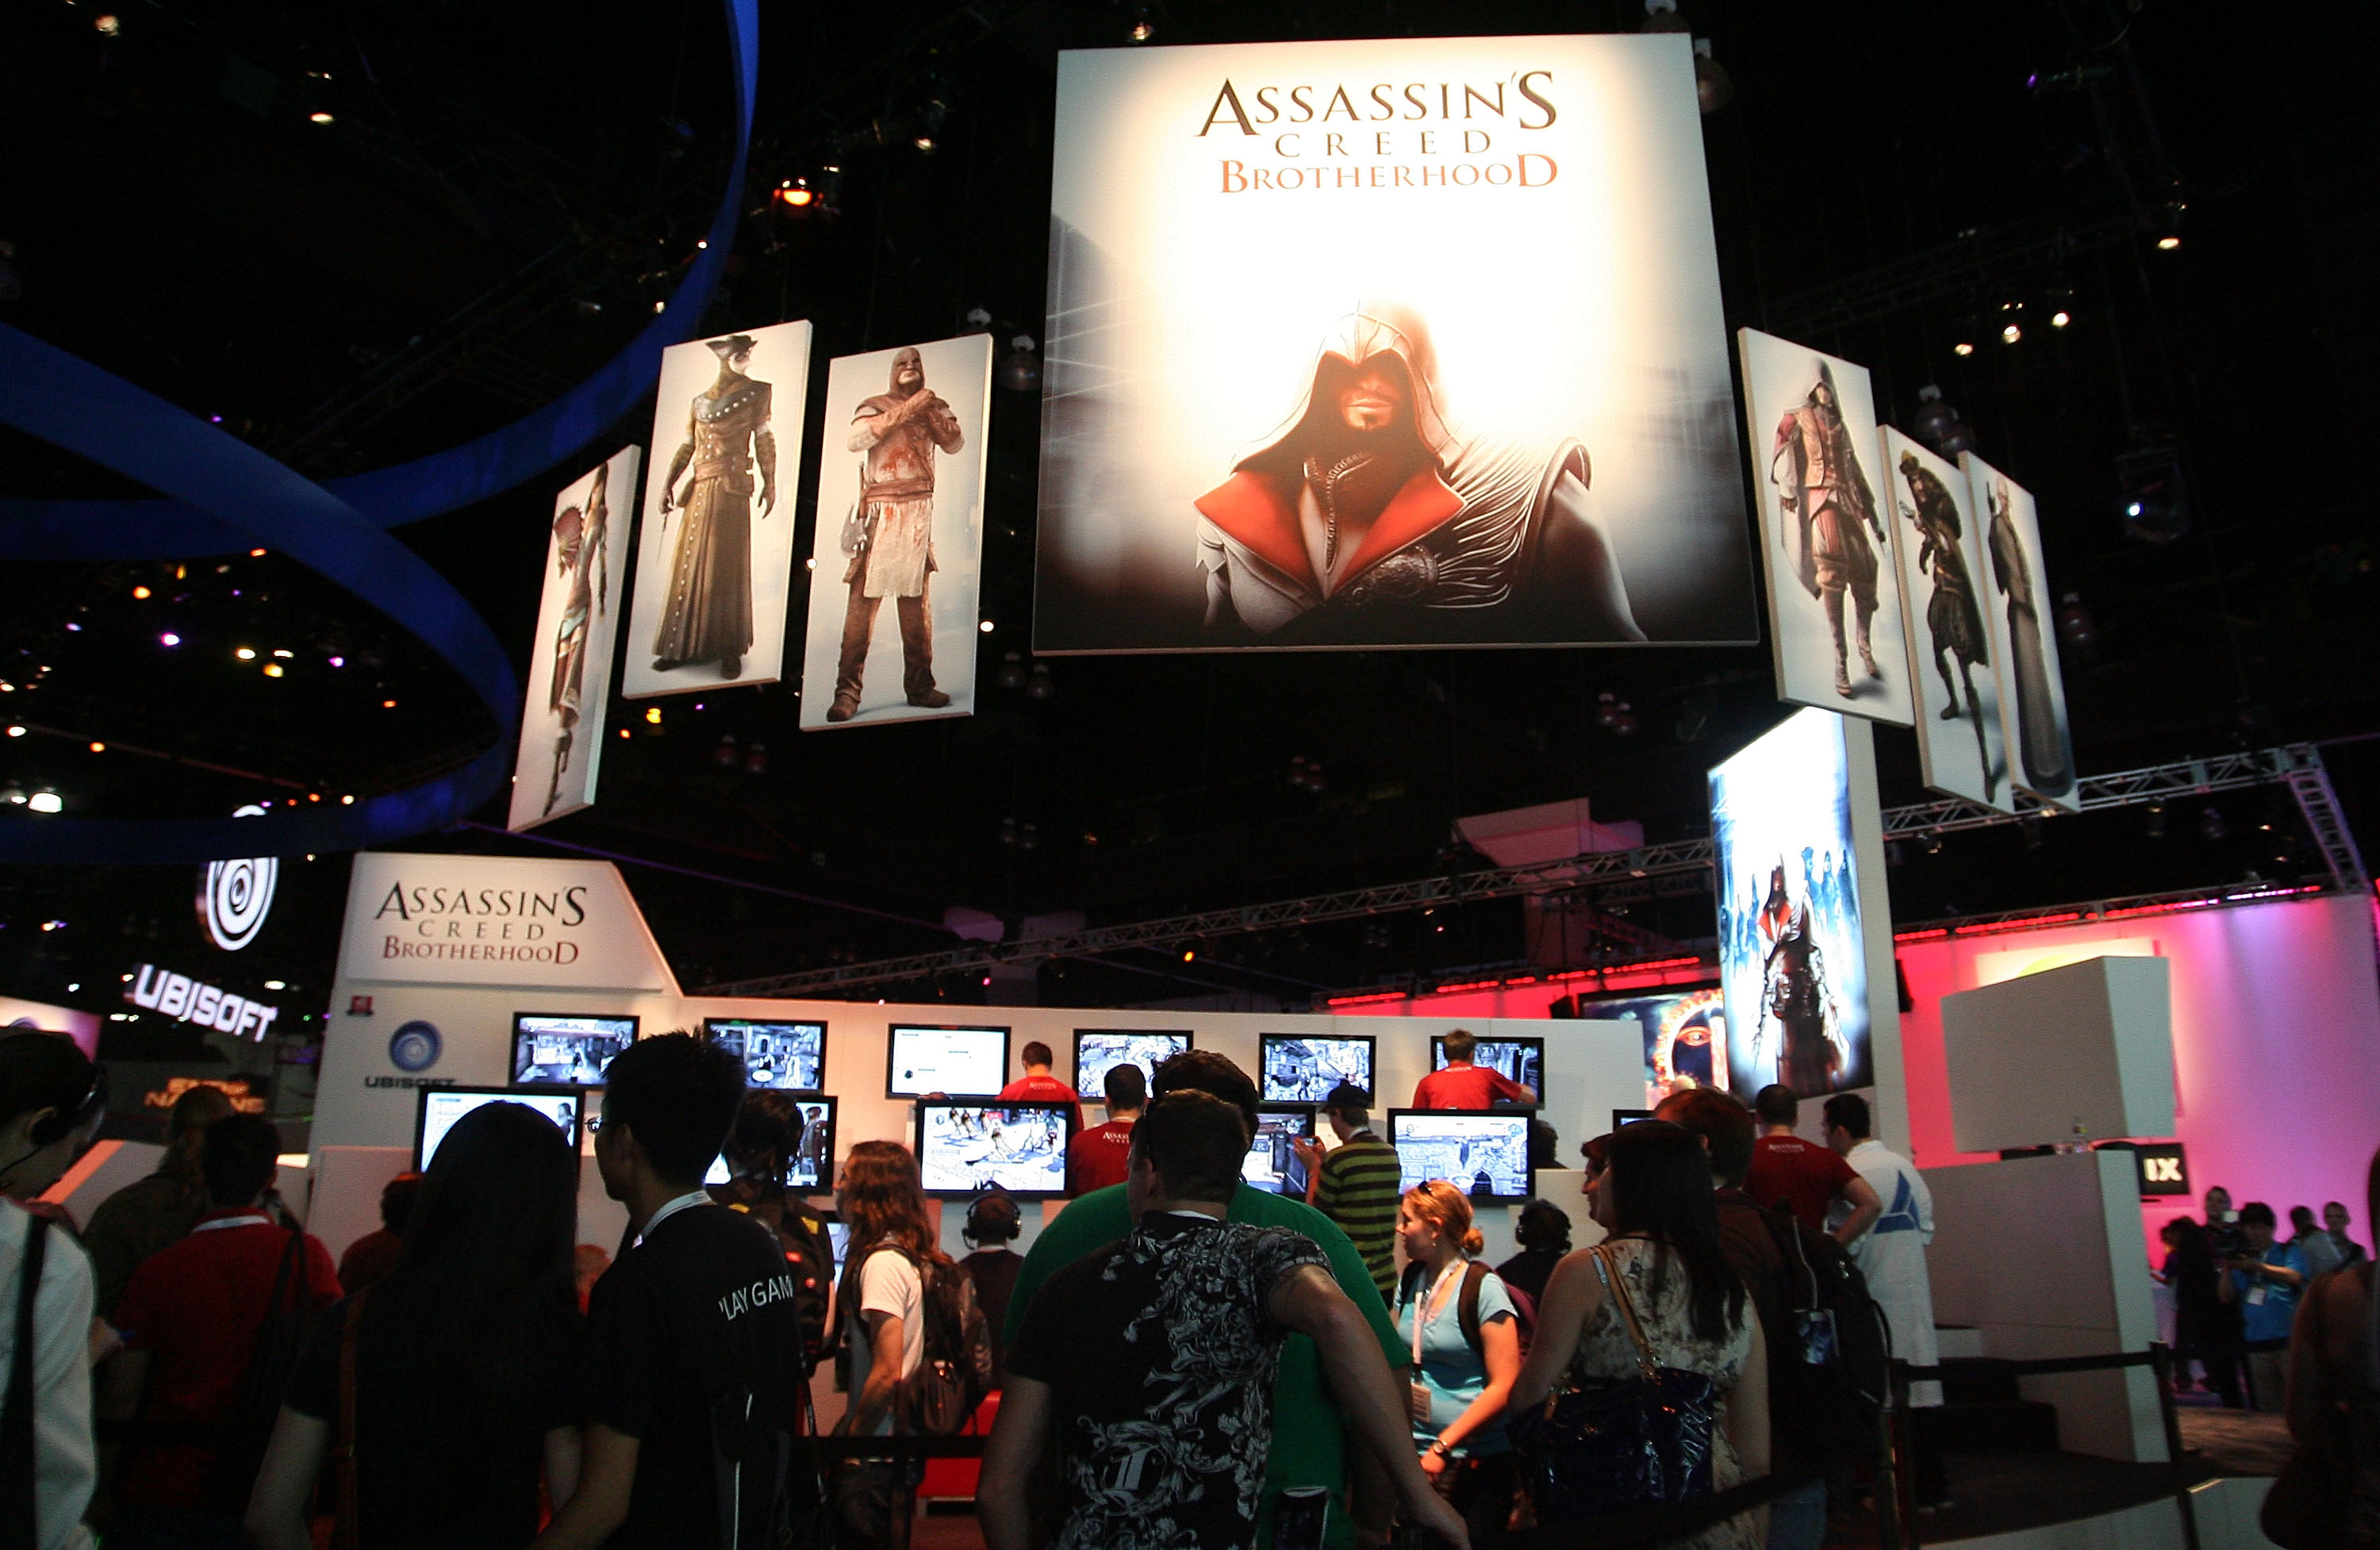 "Assassin's Creed Brotherhood". / VALERIE MACON/AFP via Getty Images